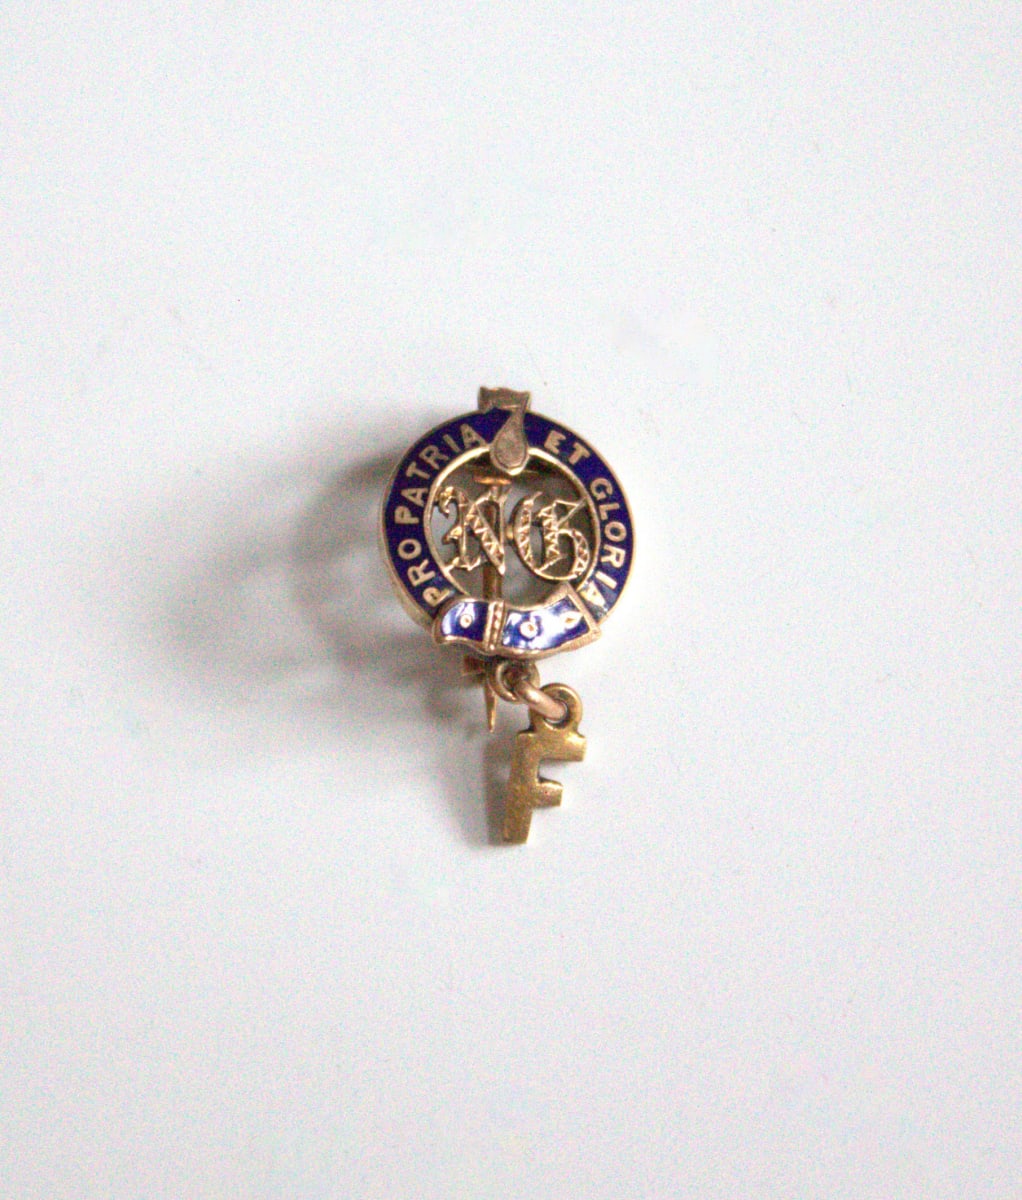 Membership Pin by Unknown, United States 